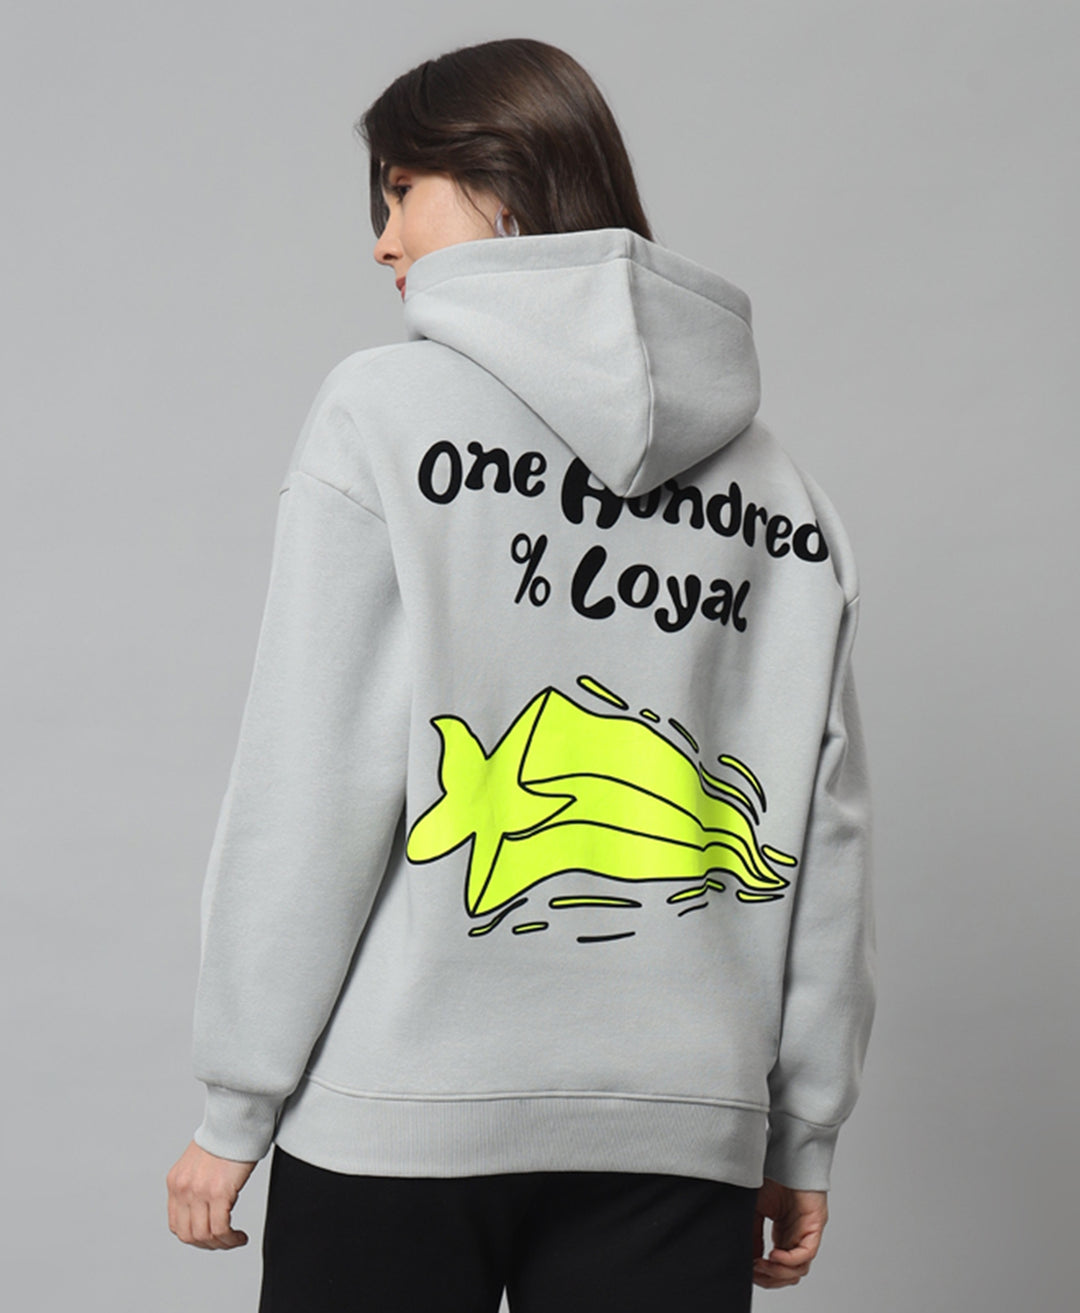 ONE HUNDRER % LOYAL Print Oversized Hoodie - griffel